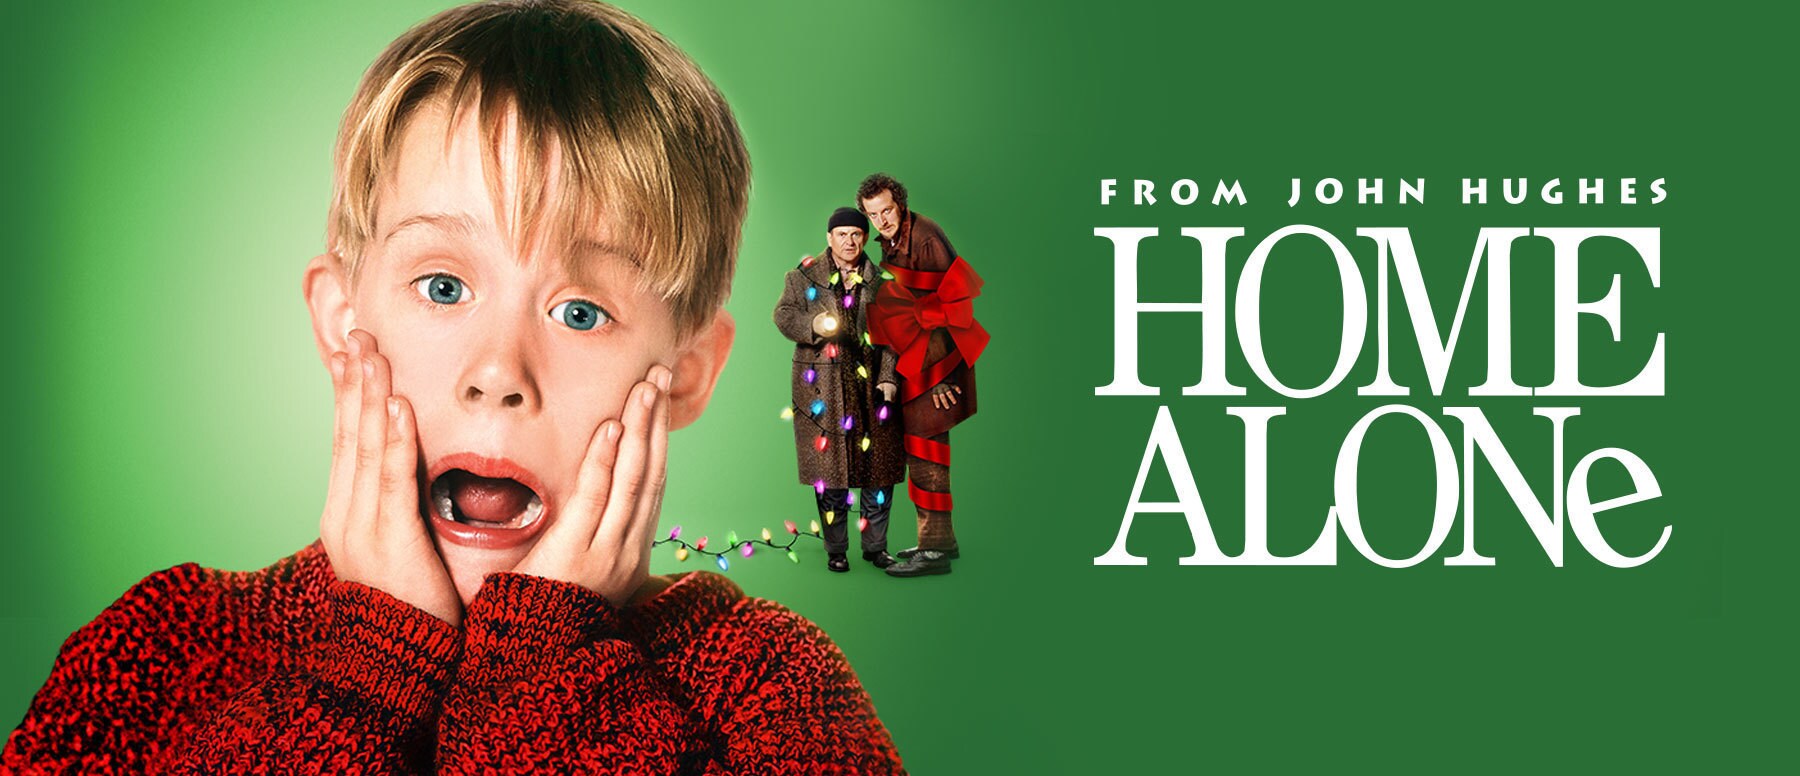 45-facts-about-the-movie-home-alone